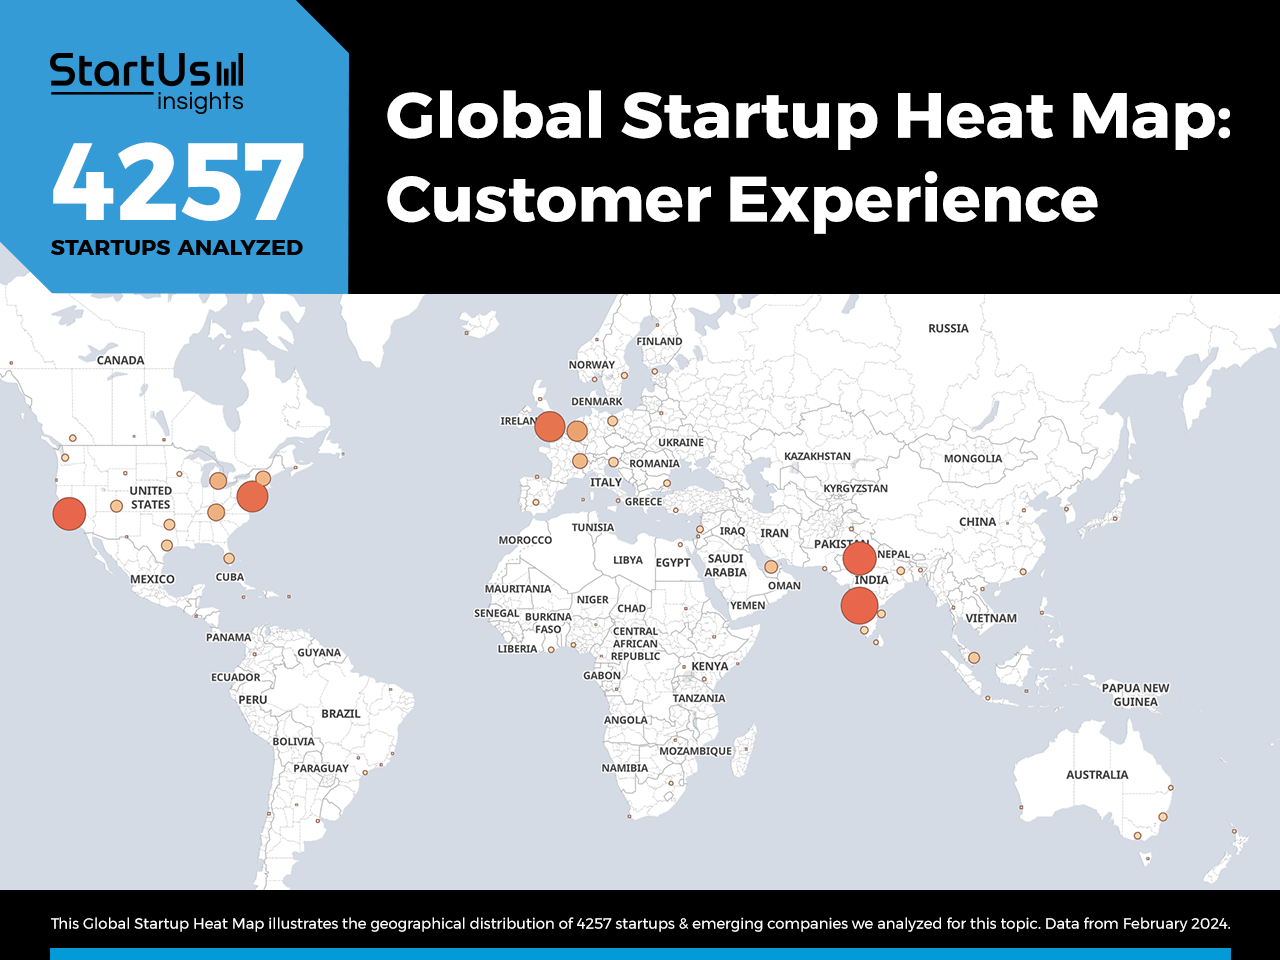 Customer-Experience-Startups-TrendResearch-Heat-Map-StartUs-Insights-noresize